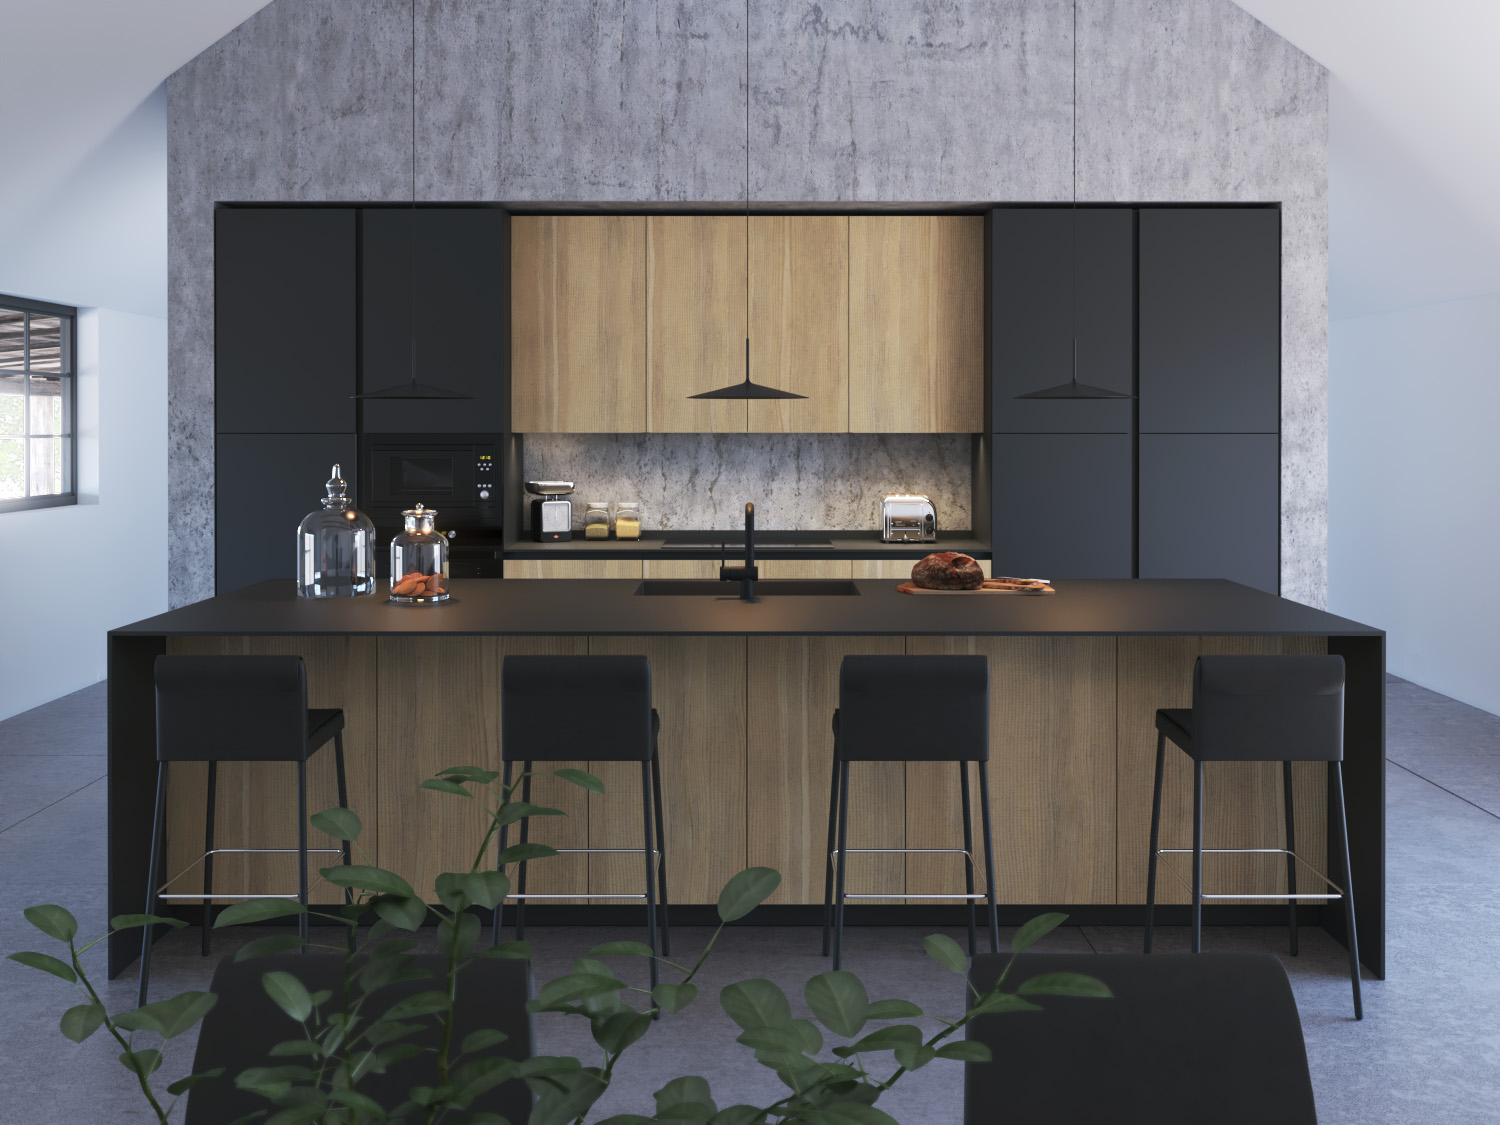 KLab 04 made to measure kitchen with island with seating for 4